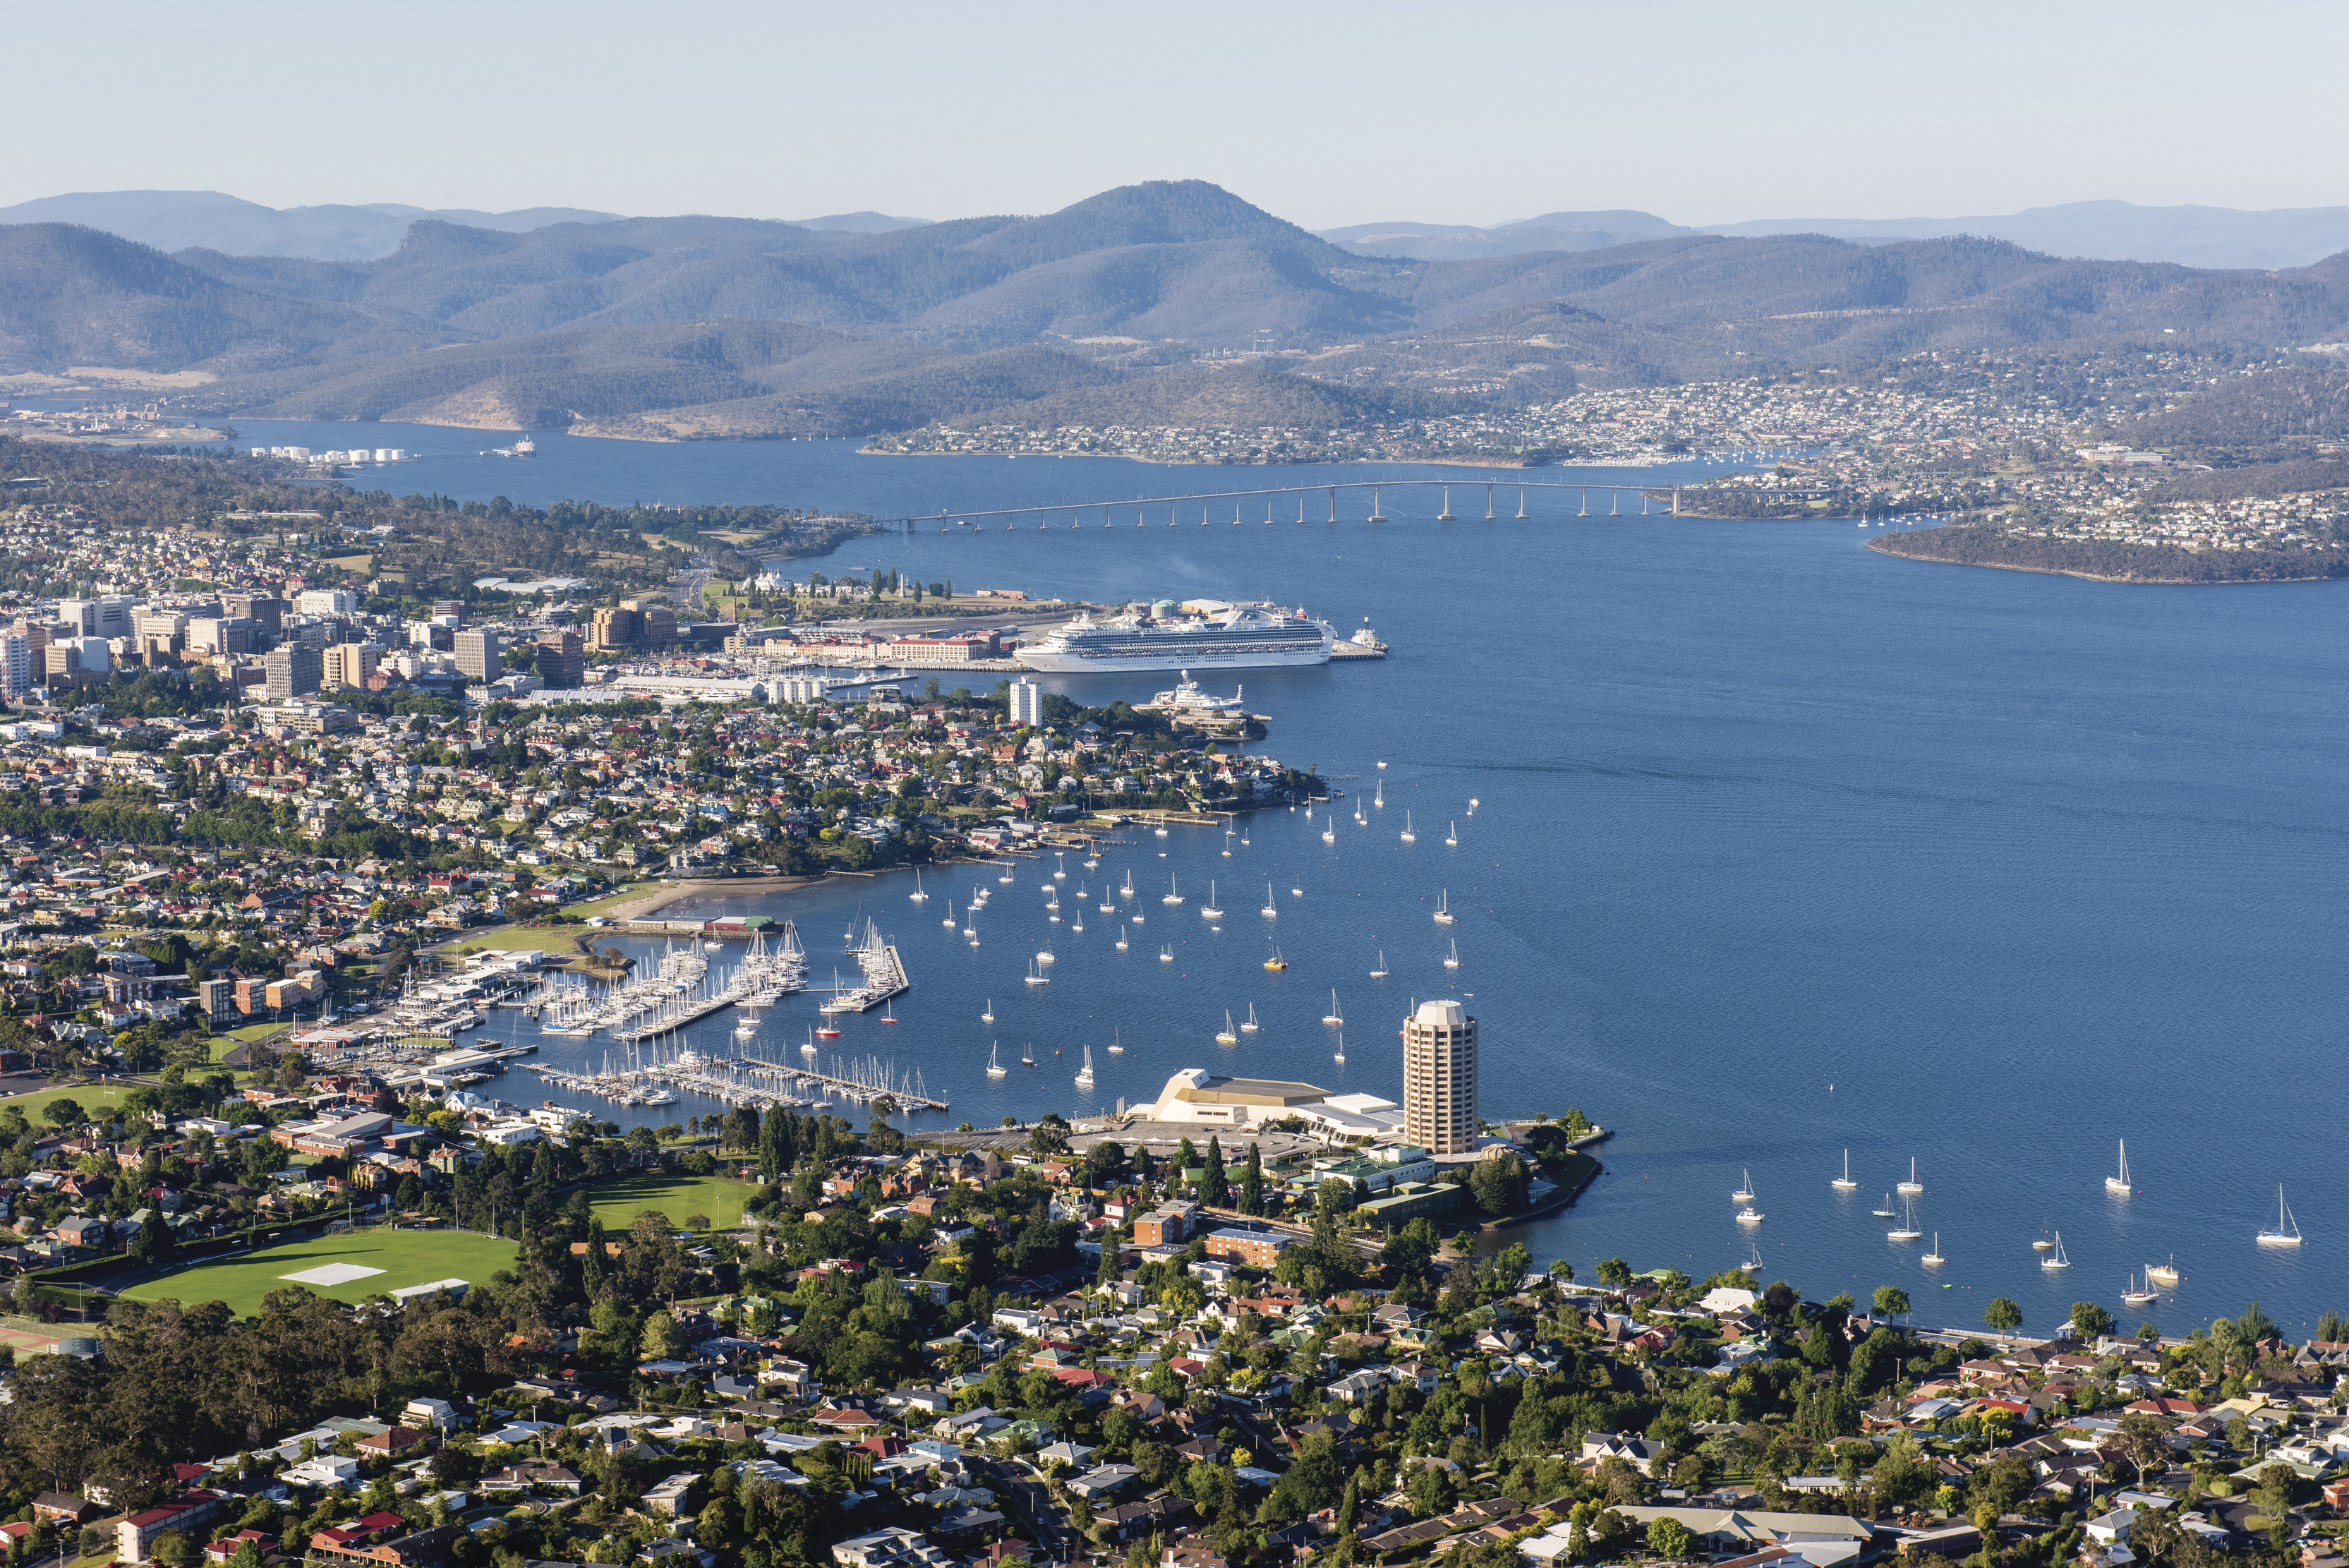 Aerial view of Hobart's stunning blue waters, city landscape and mountains.